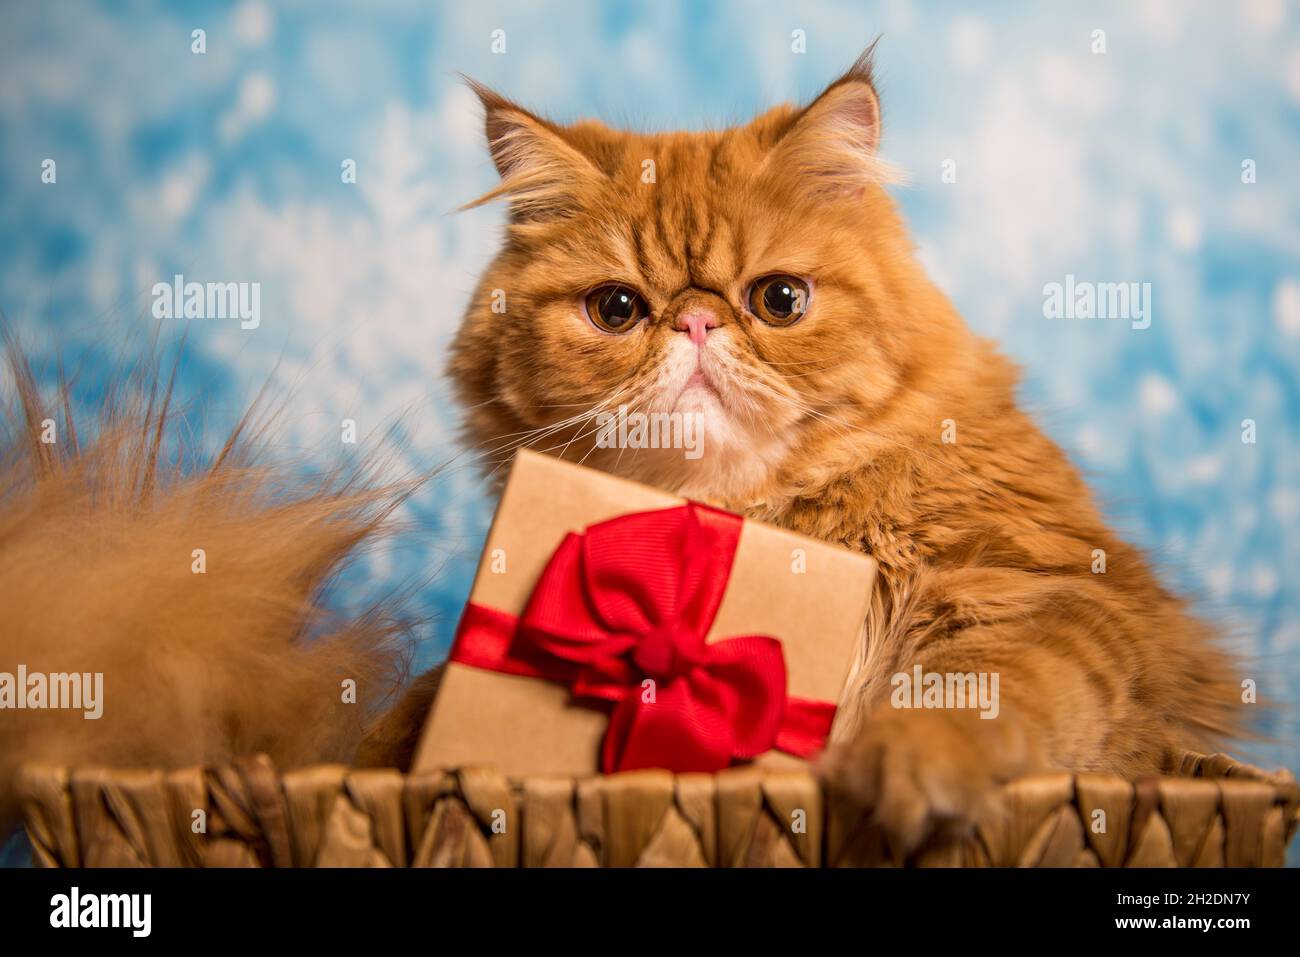 Red Persian cat with gift box on Christmas Stock Photo